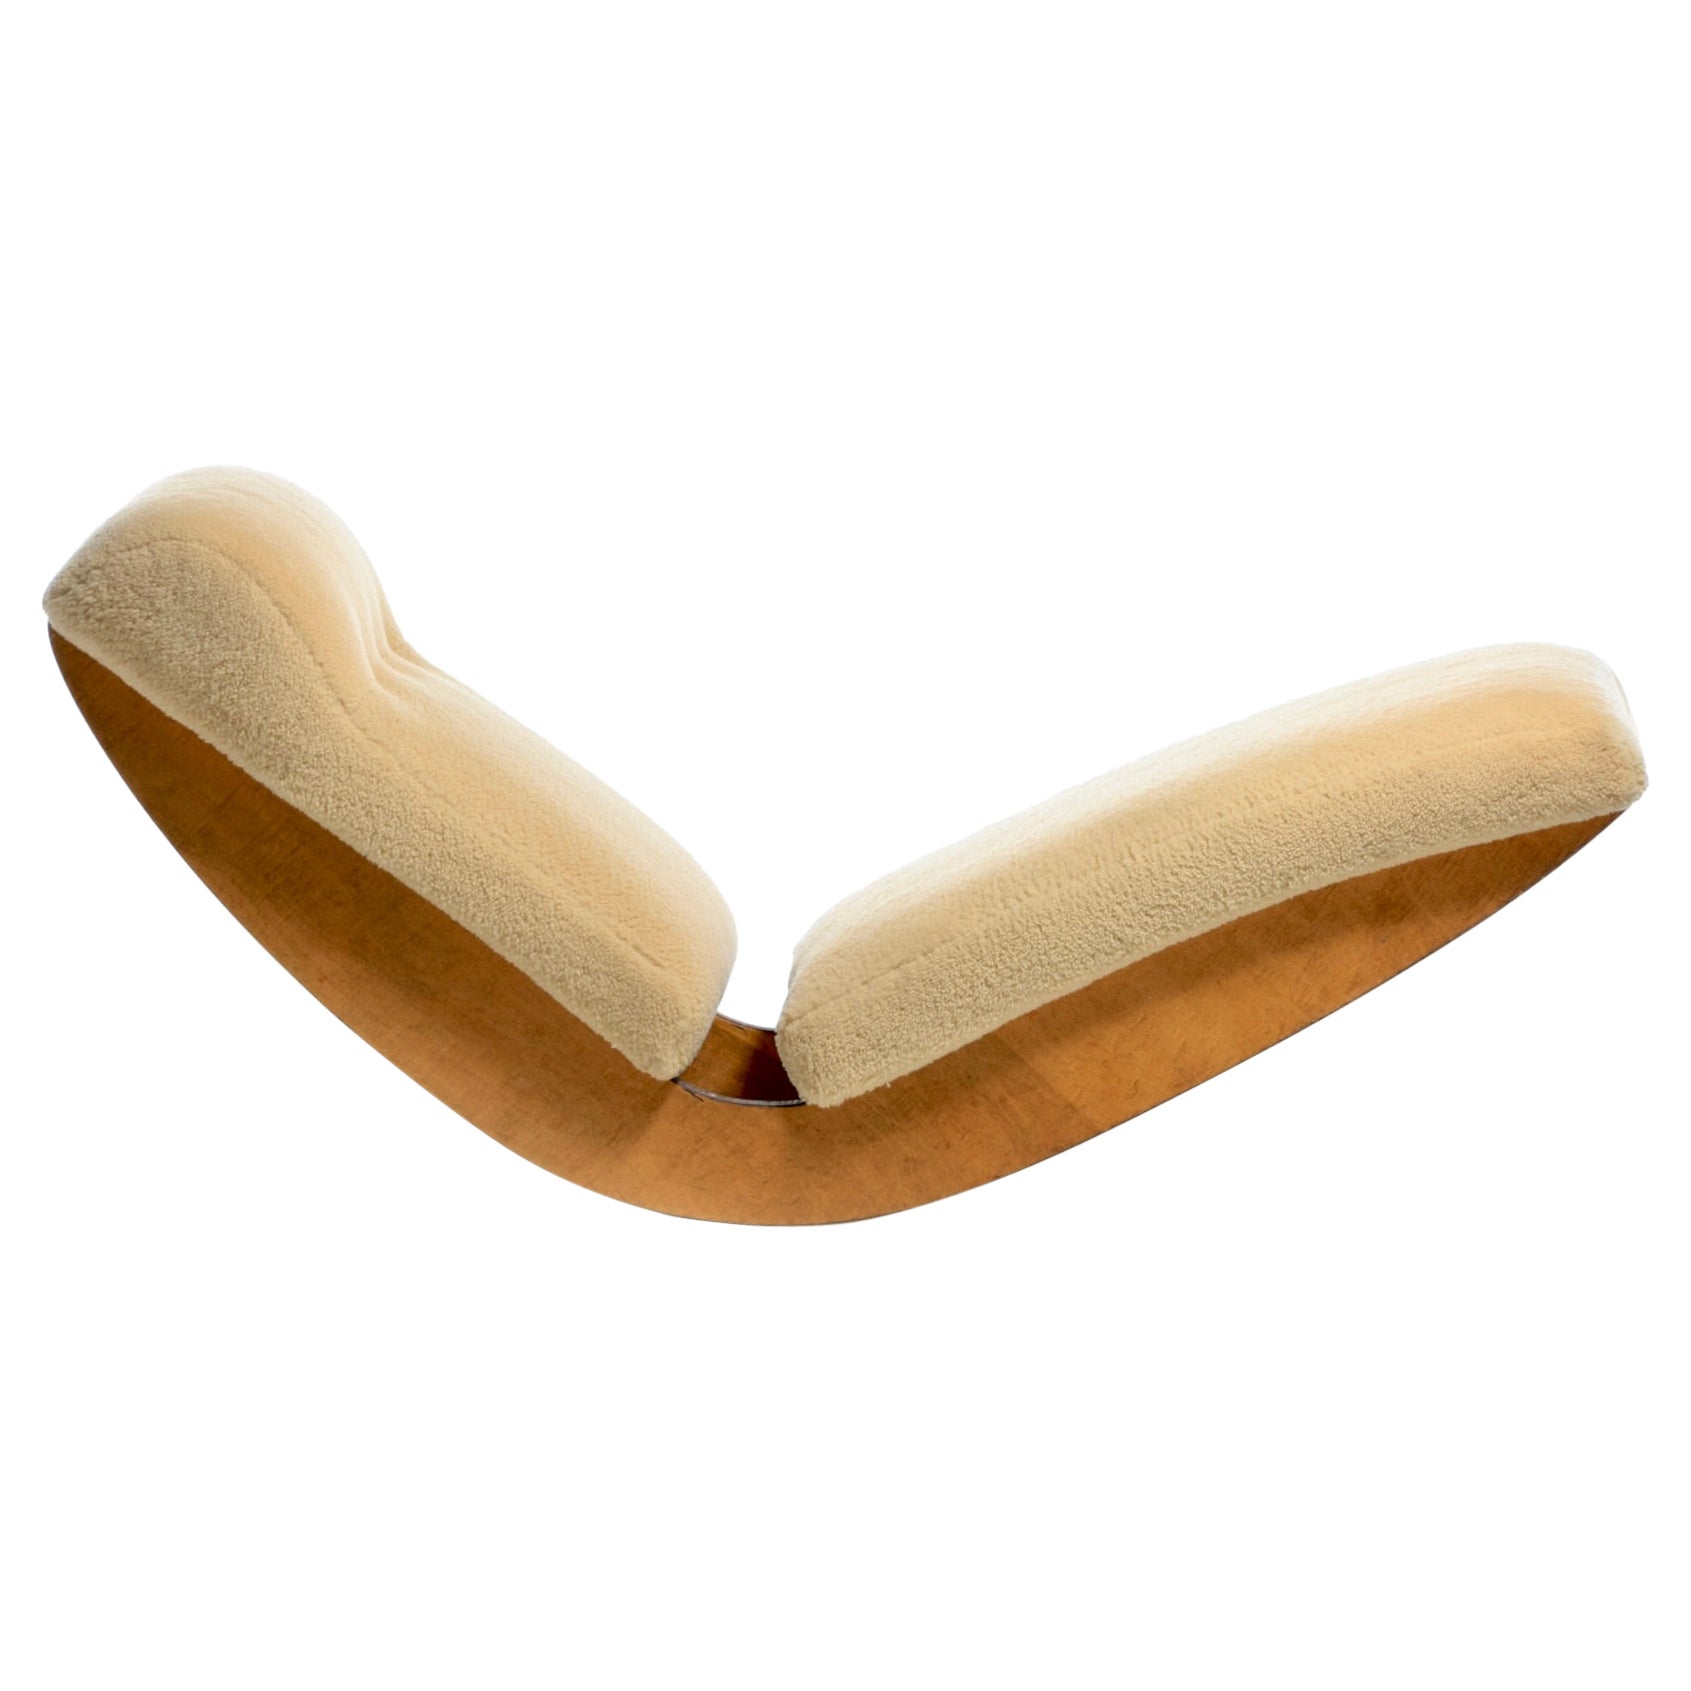 Sculptural Walnut Rocking Chaise Lounge in Soft Butterscotch Shearling c. 1980